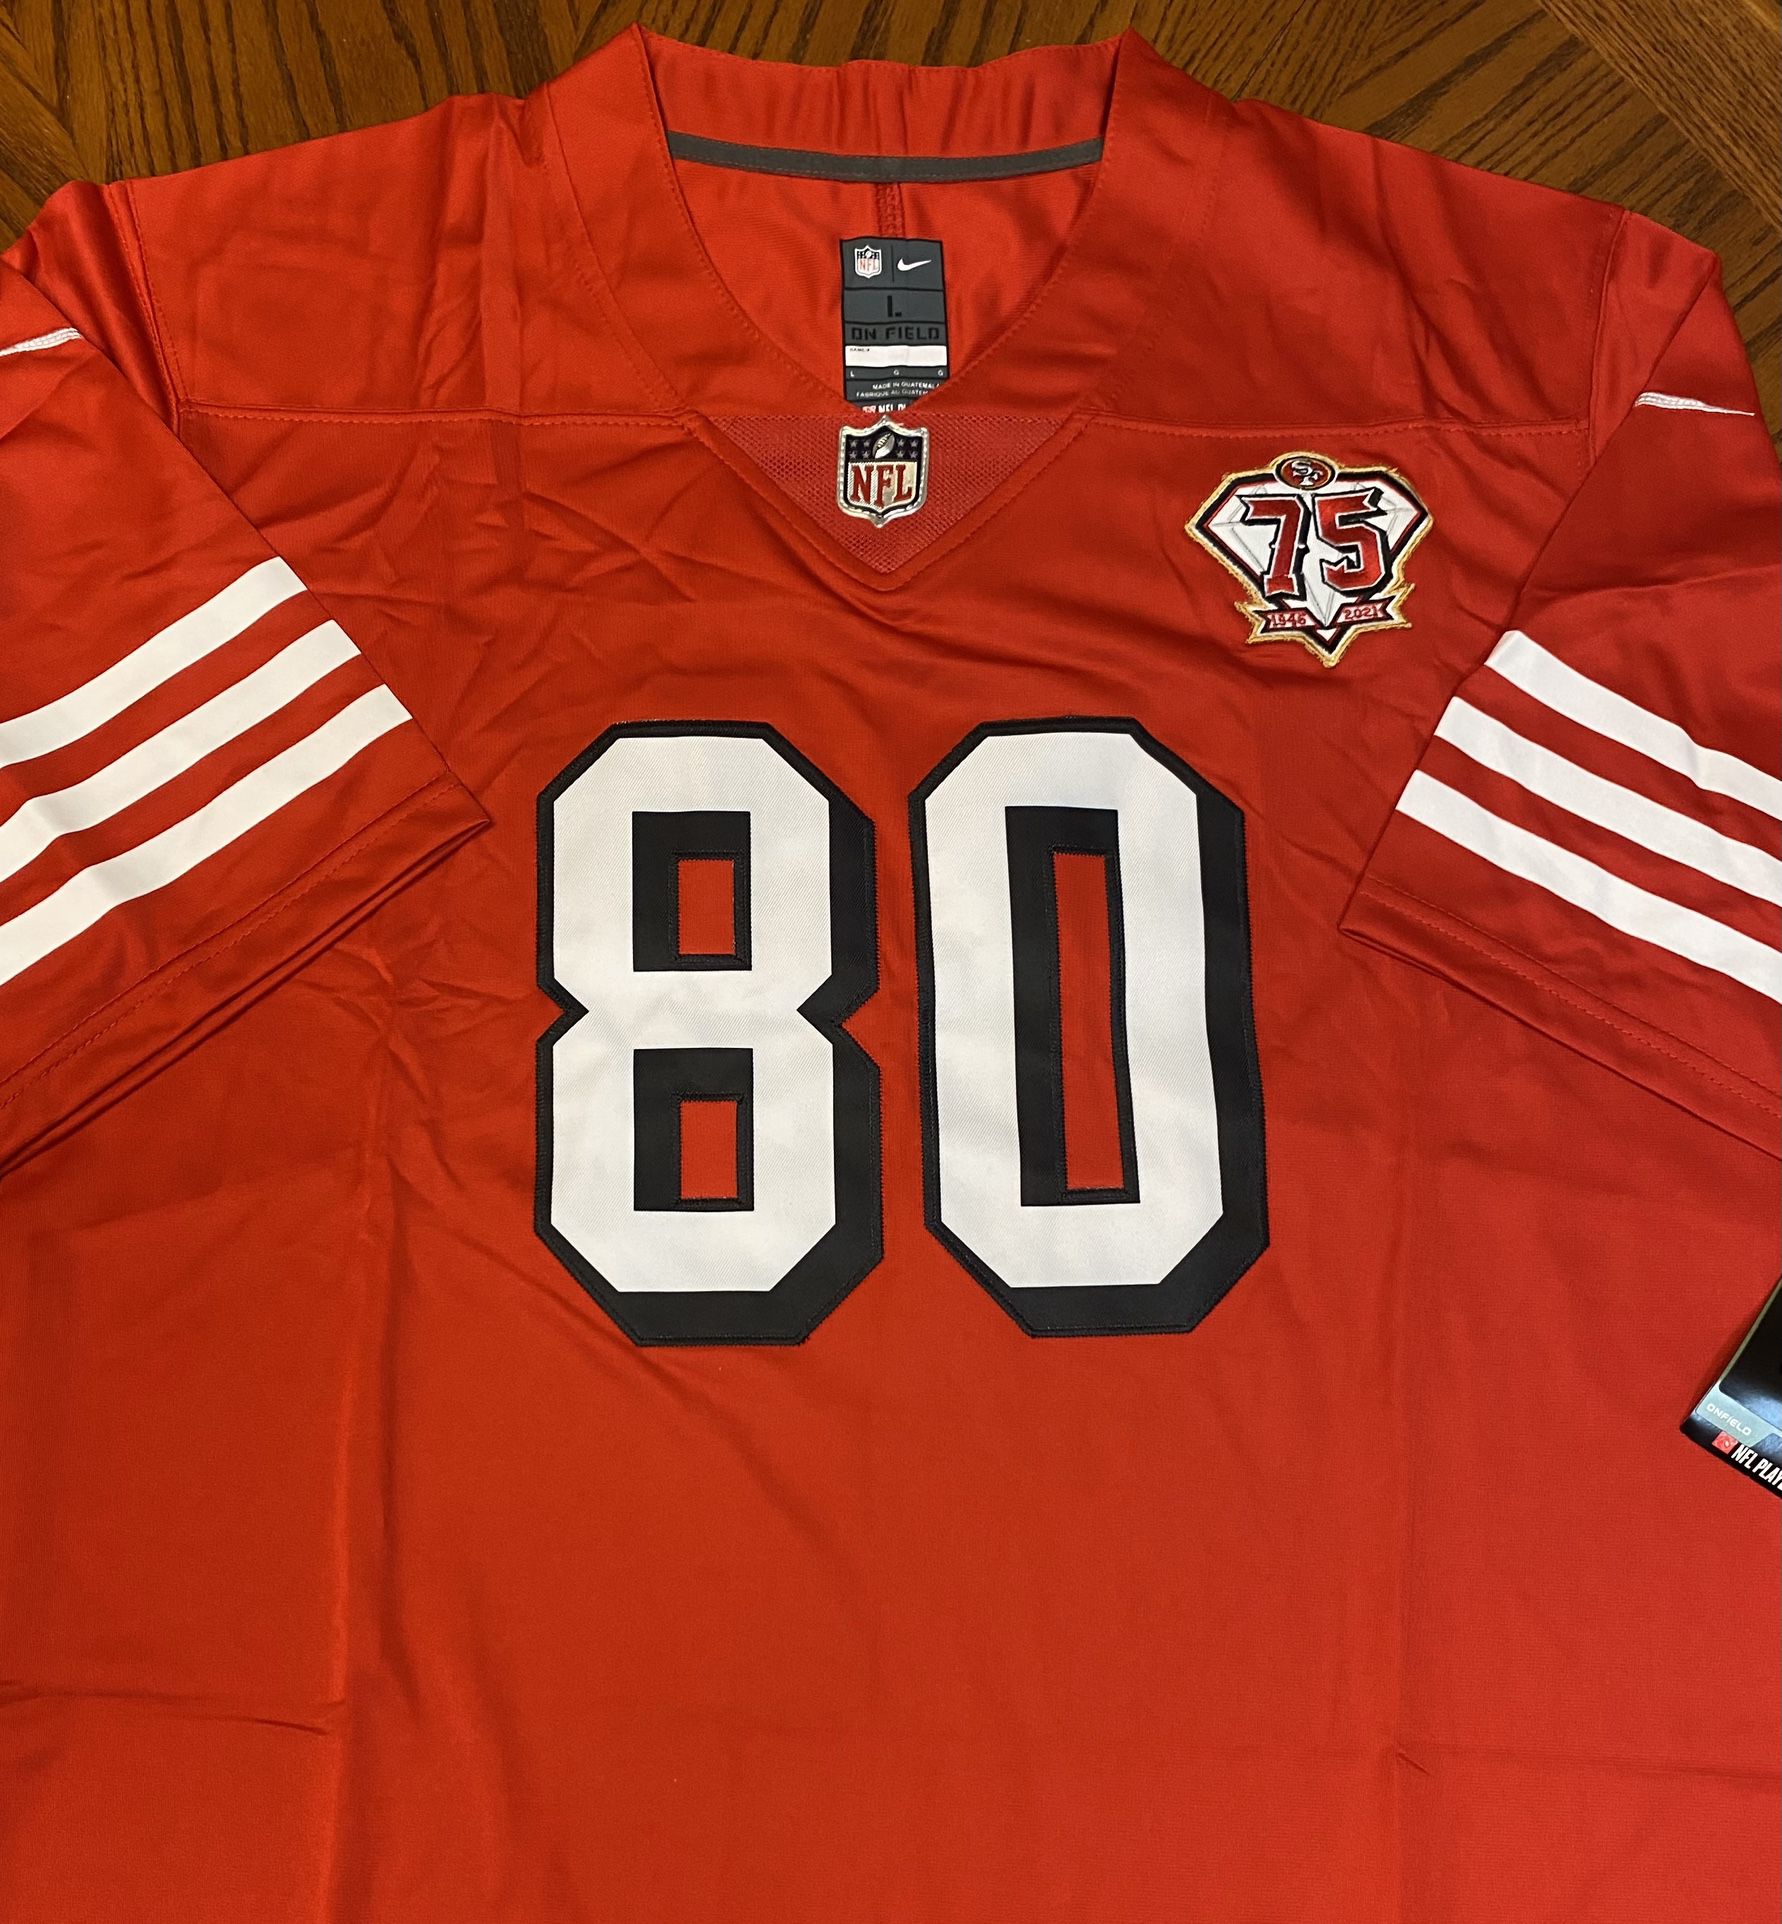 49ers throwback jersey 75th anniversary